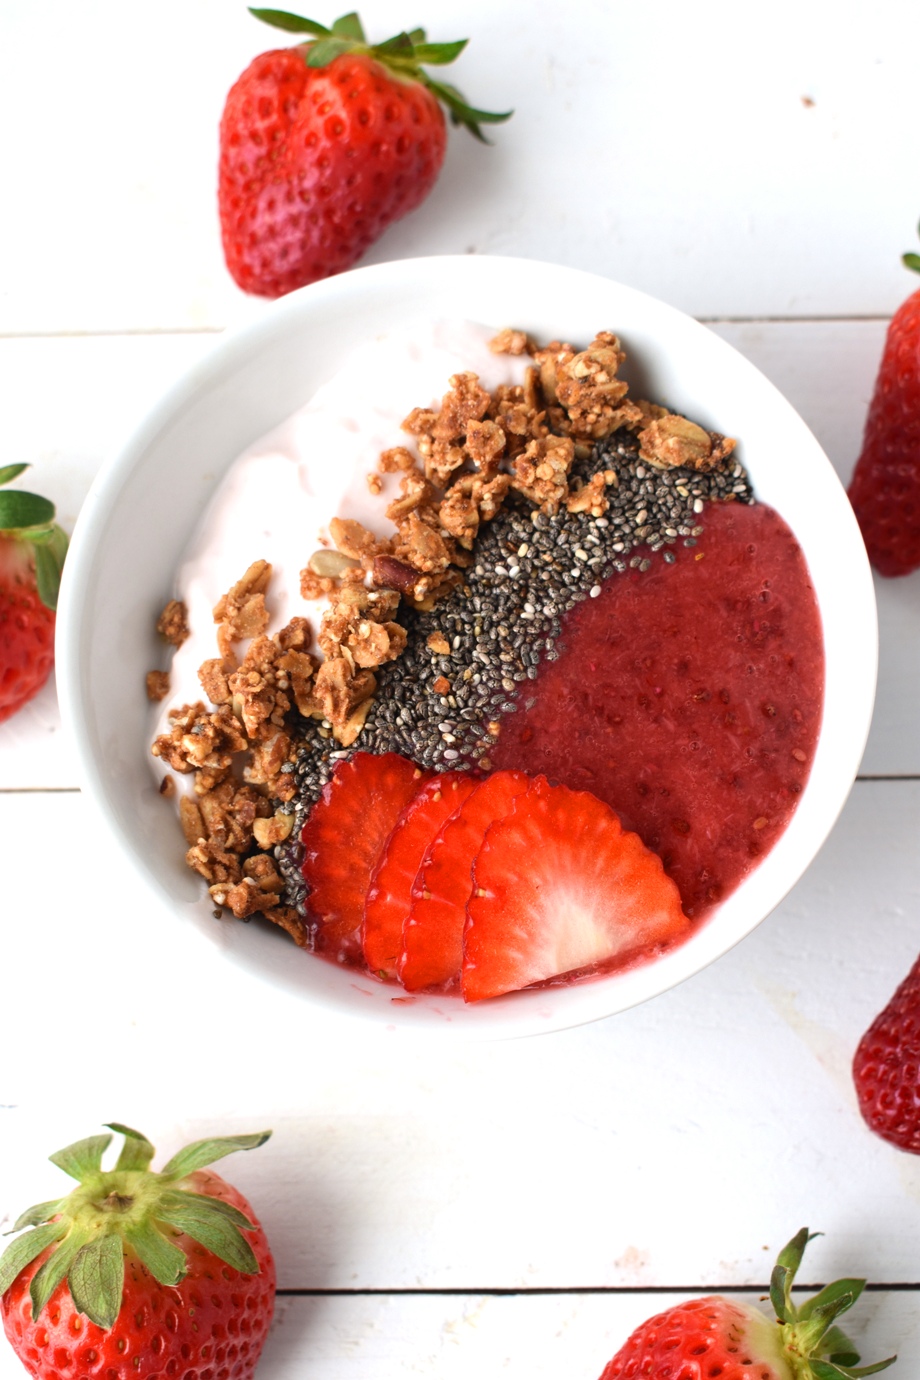 Easy 3-Ingredient Strawberry Chia Seed Jam